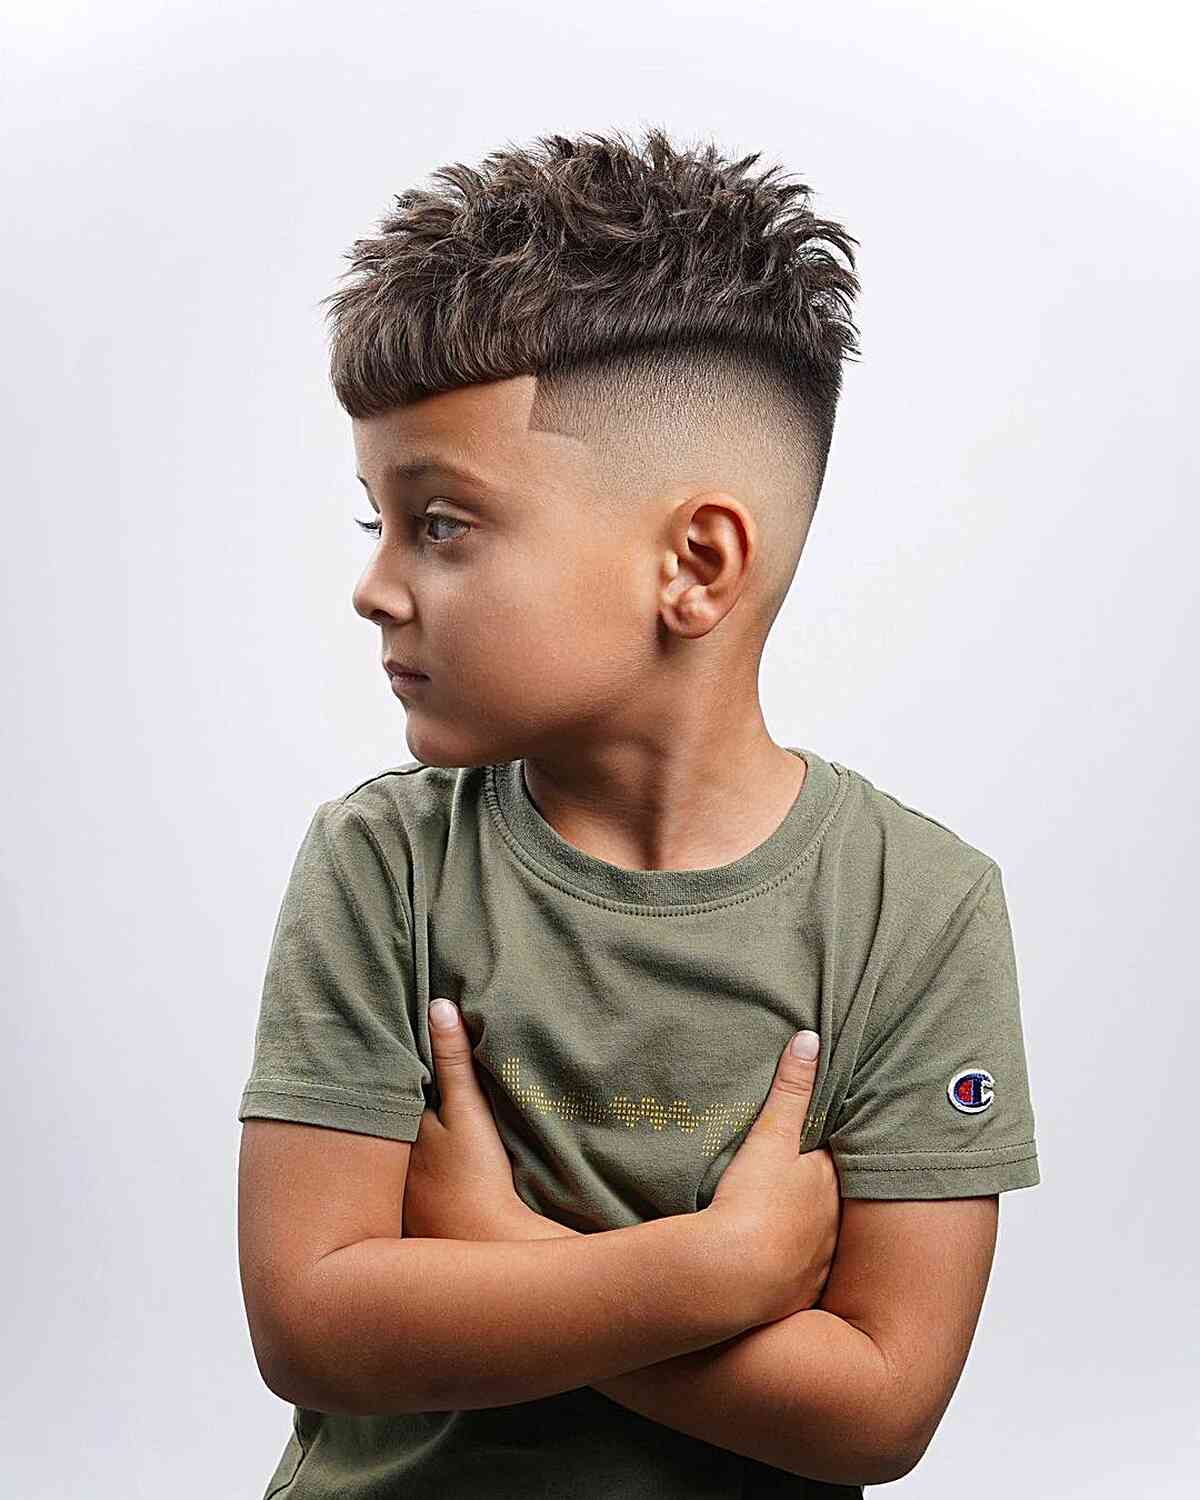 59 Best Haircuts For Boys in 2023